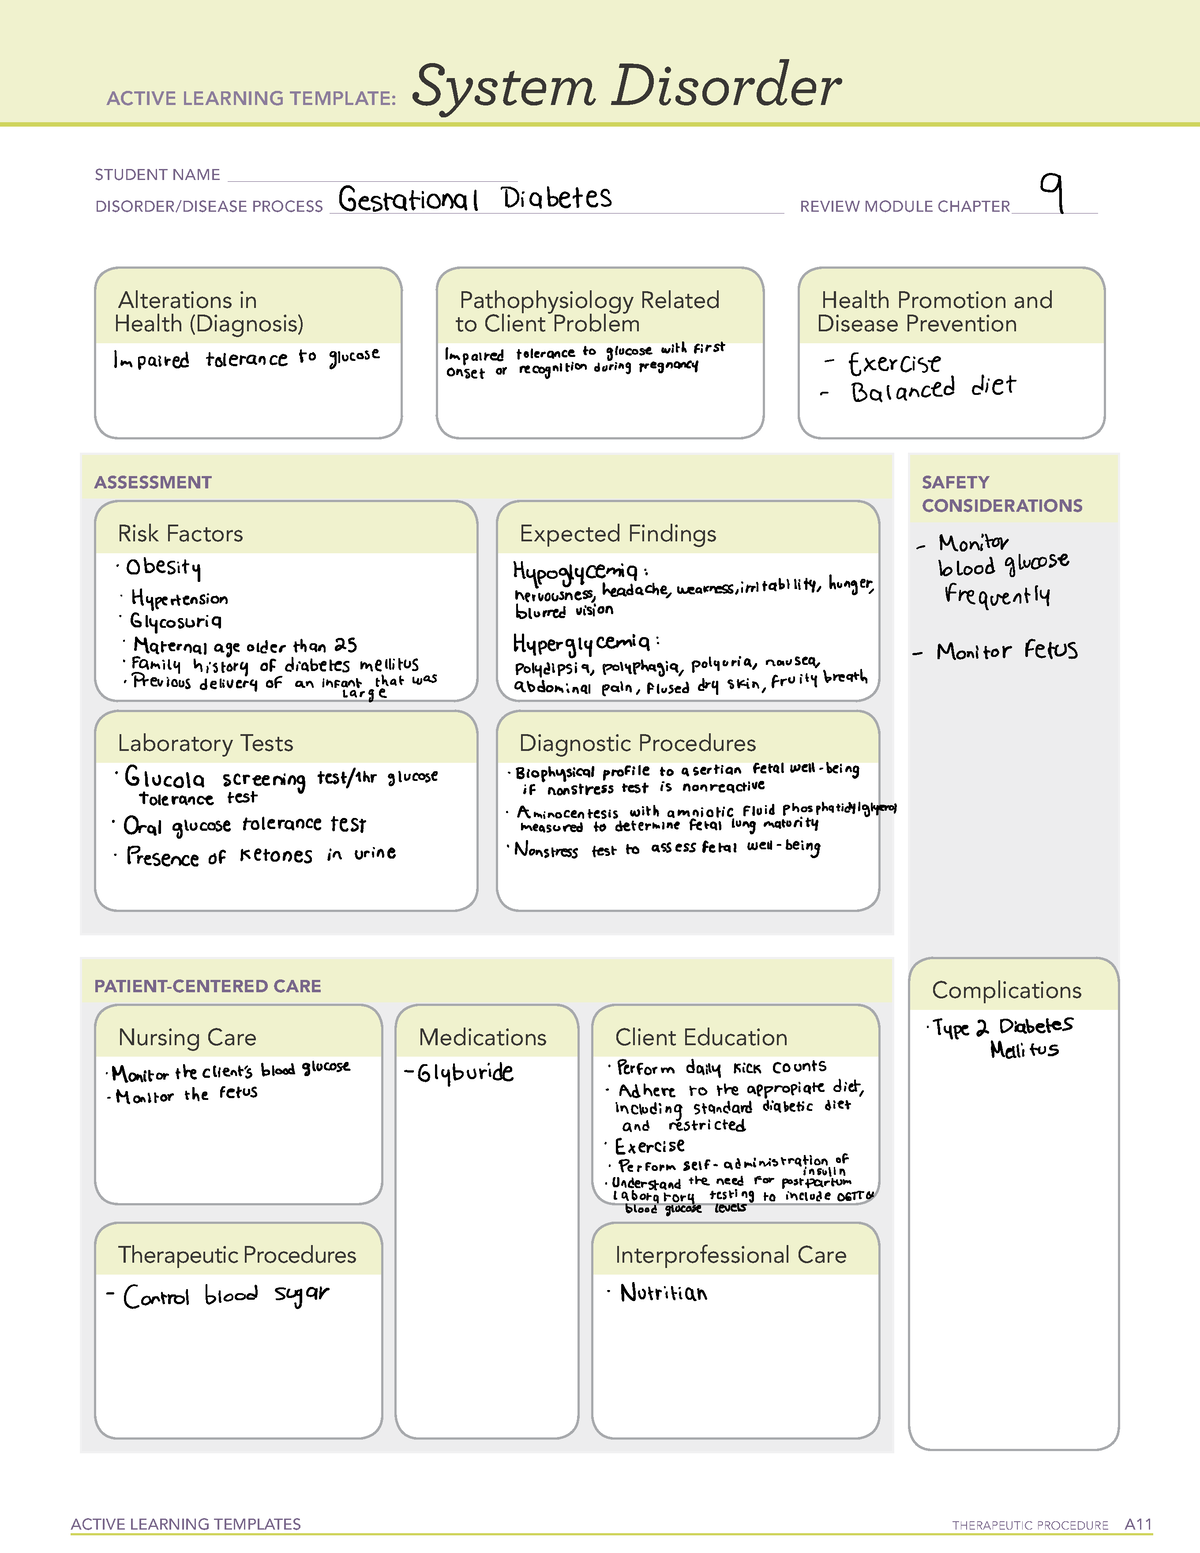 ATI Template gestational diabetes ACTIVE LEARNING TEMPLATES